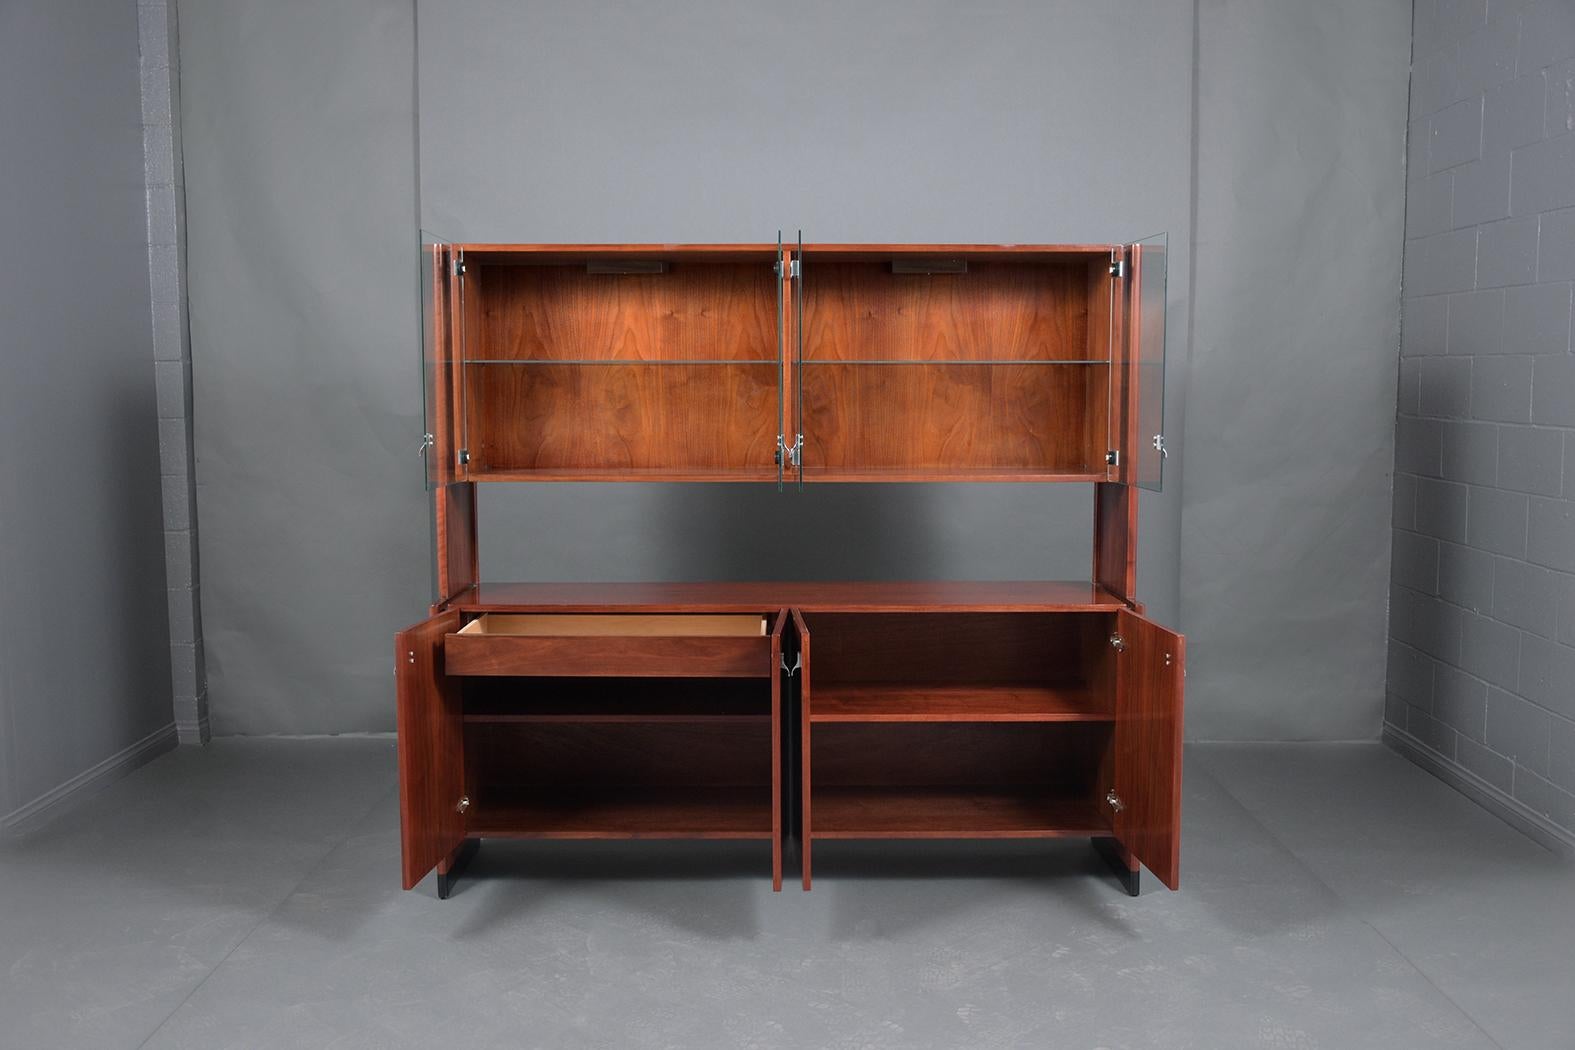 Discover the charm of the 1960s with our Mahogany Cabinet, a testament to mid-century elegance and craftsmanship. Hand-crafted from high-quality mahogany wood, this piece has been professionally restored to ensure it retains its timeless beauty and